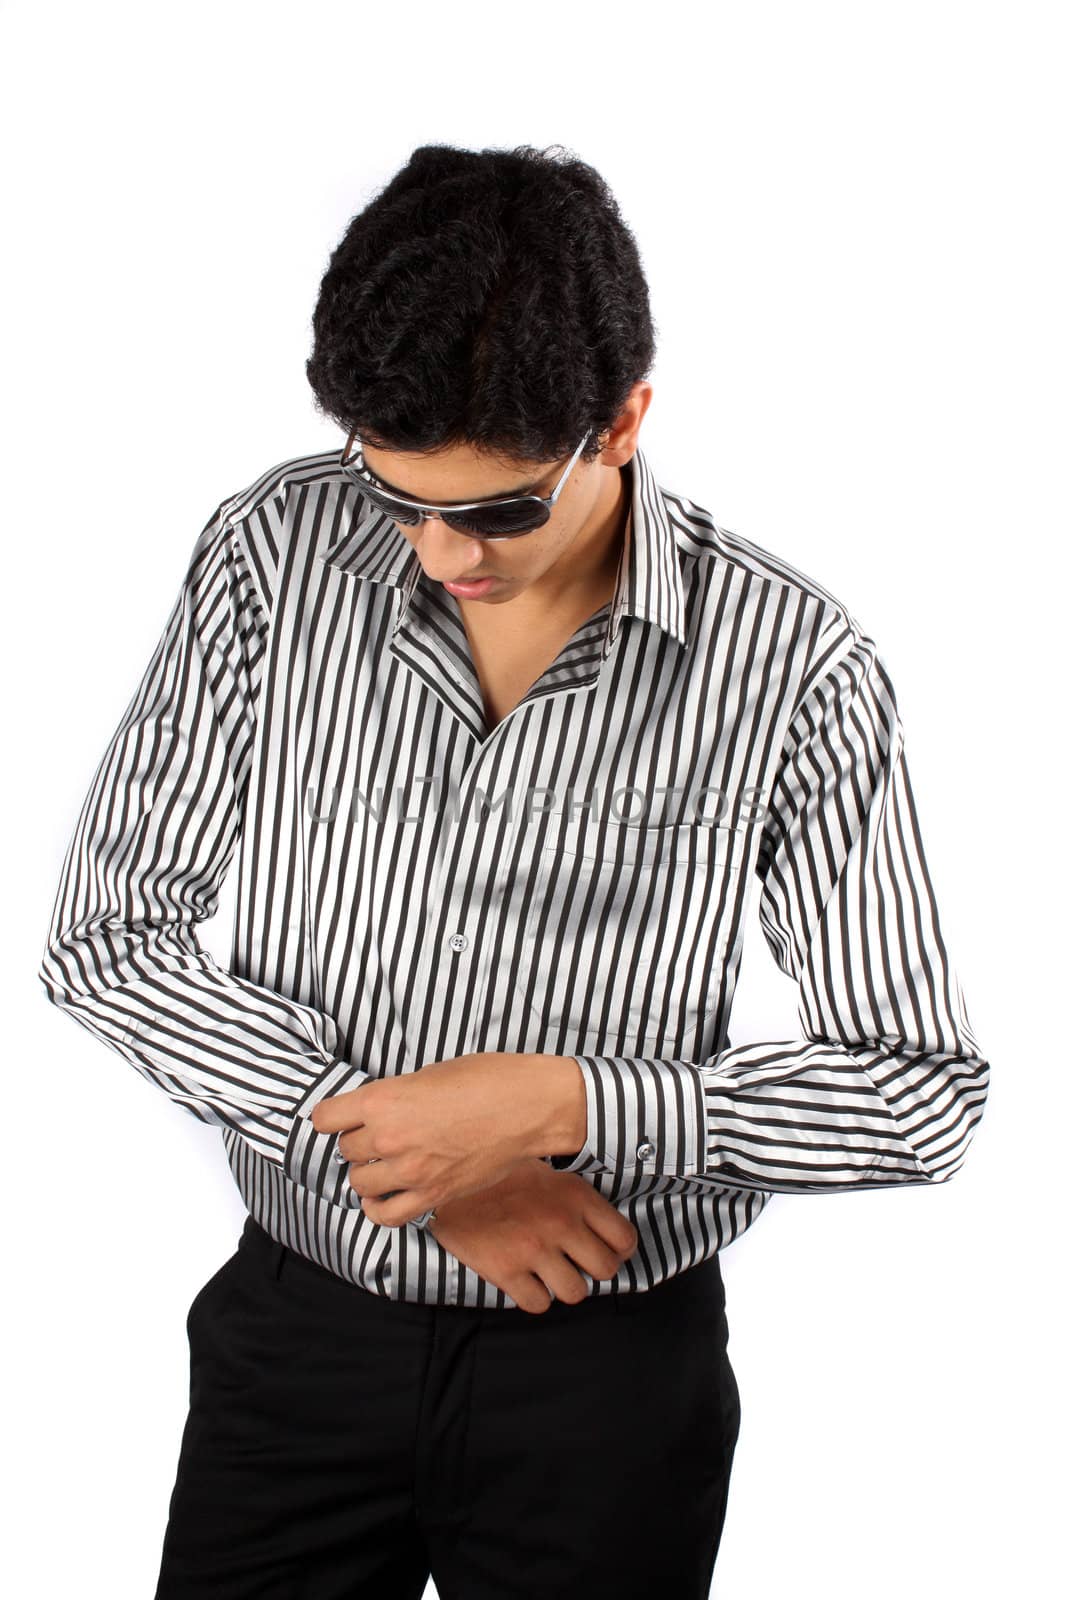 A handsome young Indian guy dressing up, on white studio background.